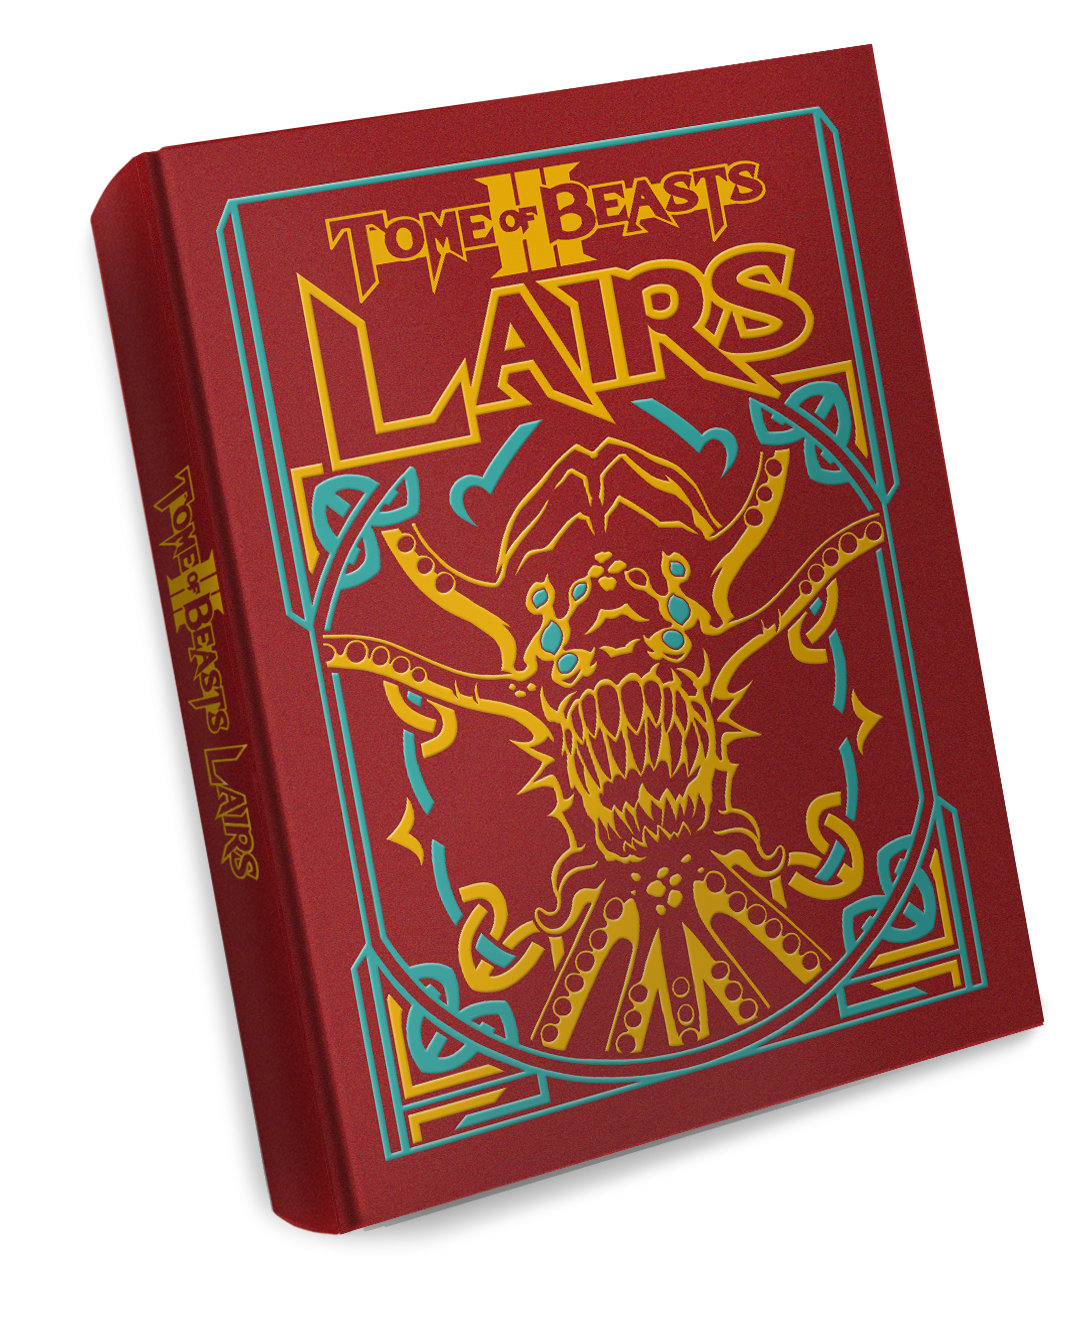 Book of Lairs by Kobold Press